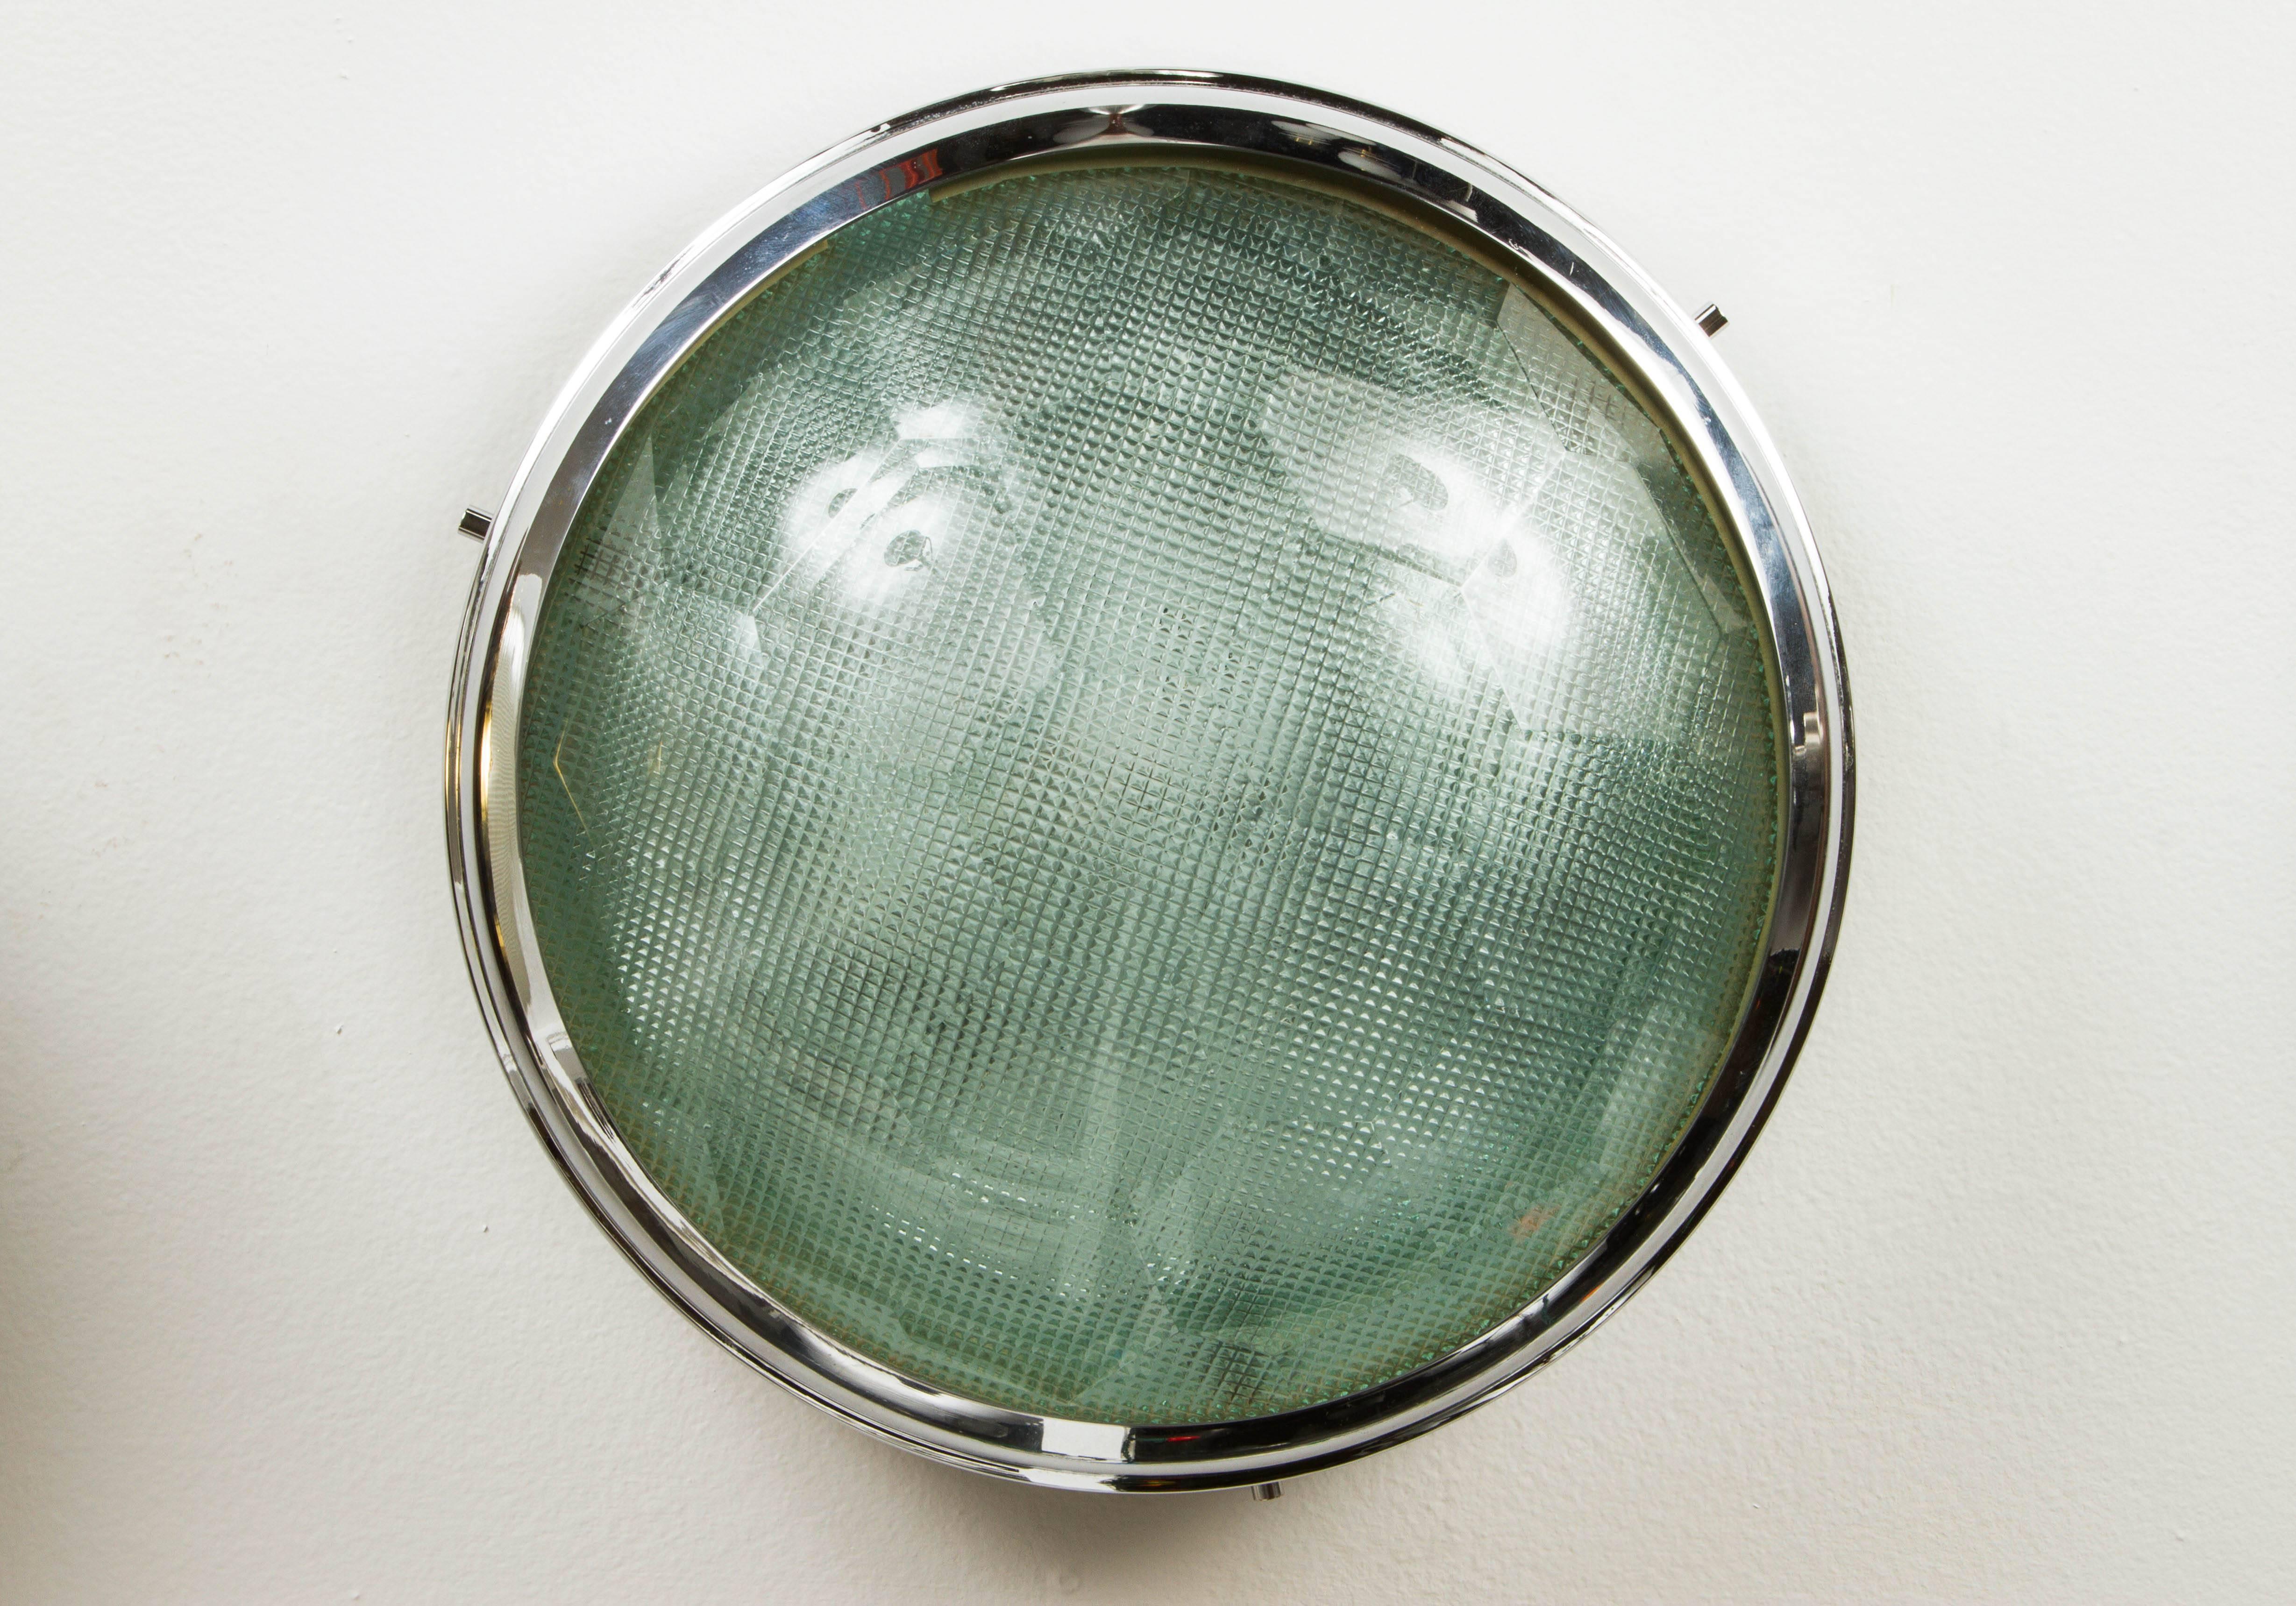 1960s Max Ingrand wall or ceiling light for Fontana Arte. A true Italian gem executed in shiny chrome with dual glass sections etched green with jewel like appearance. A uniquely refined modernist design by a highly collectible icon.
